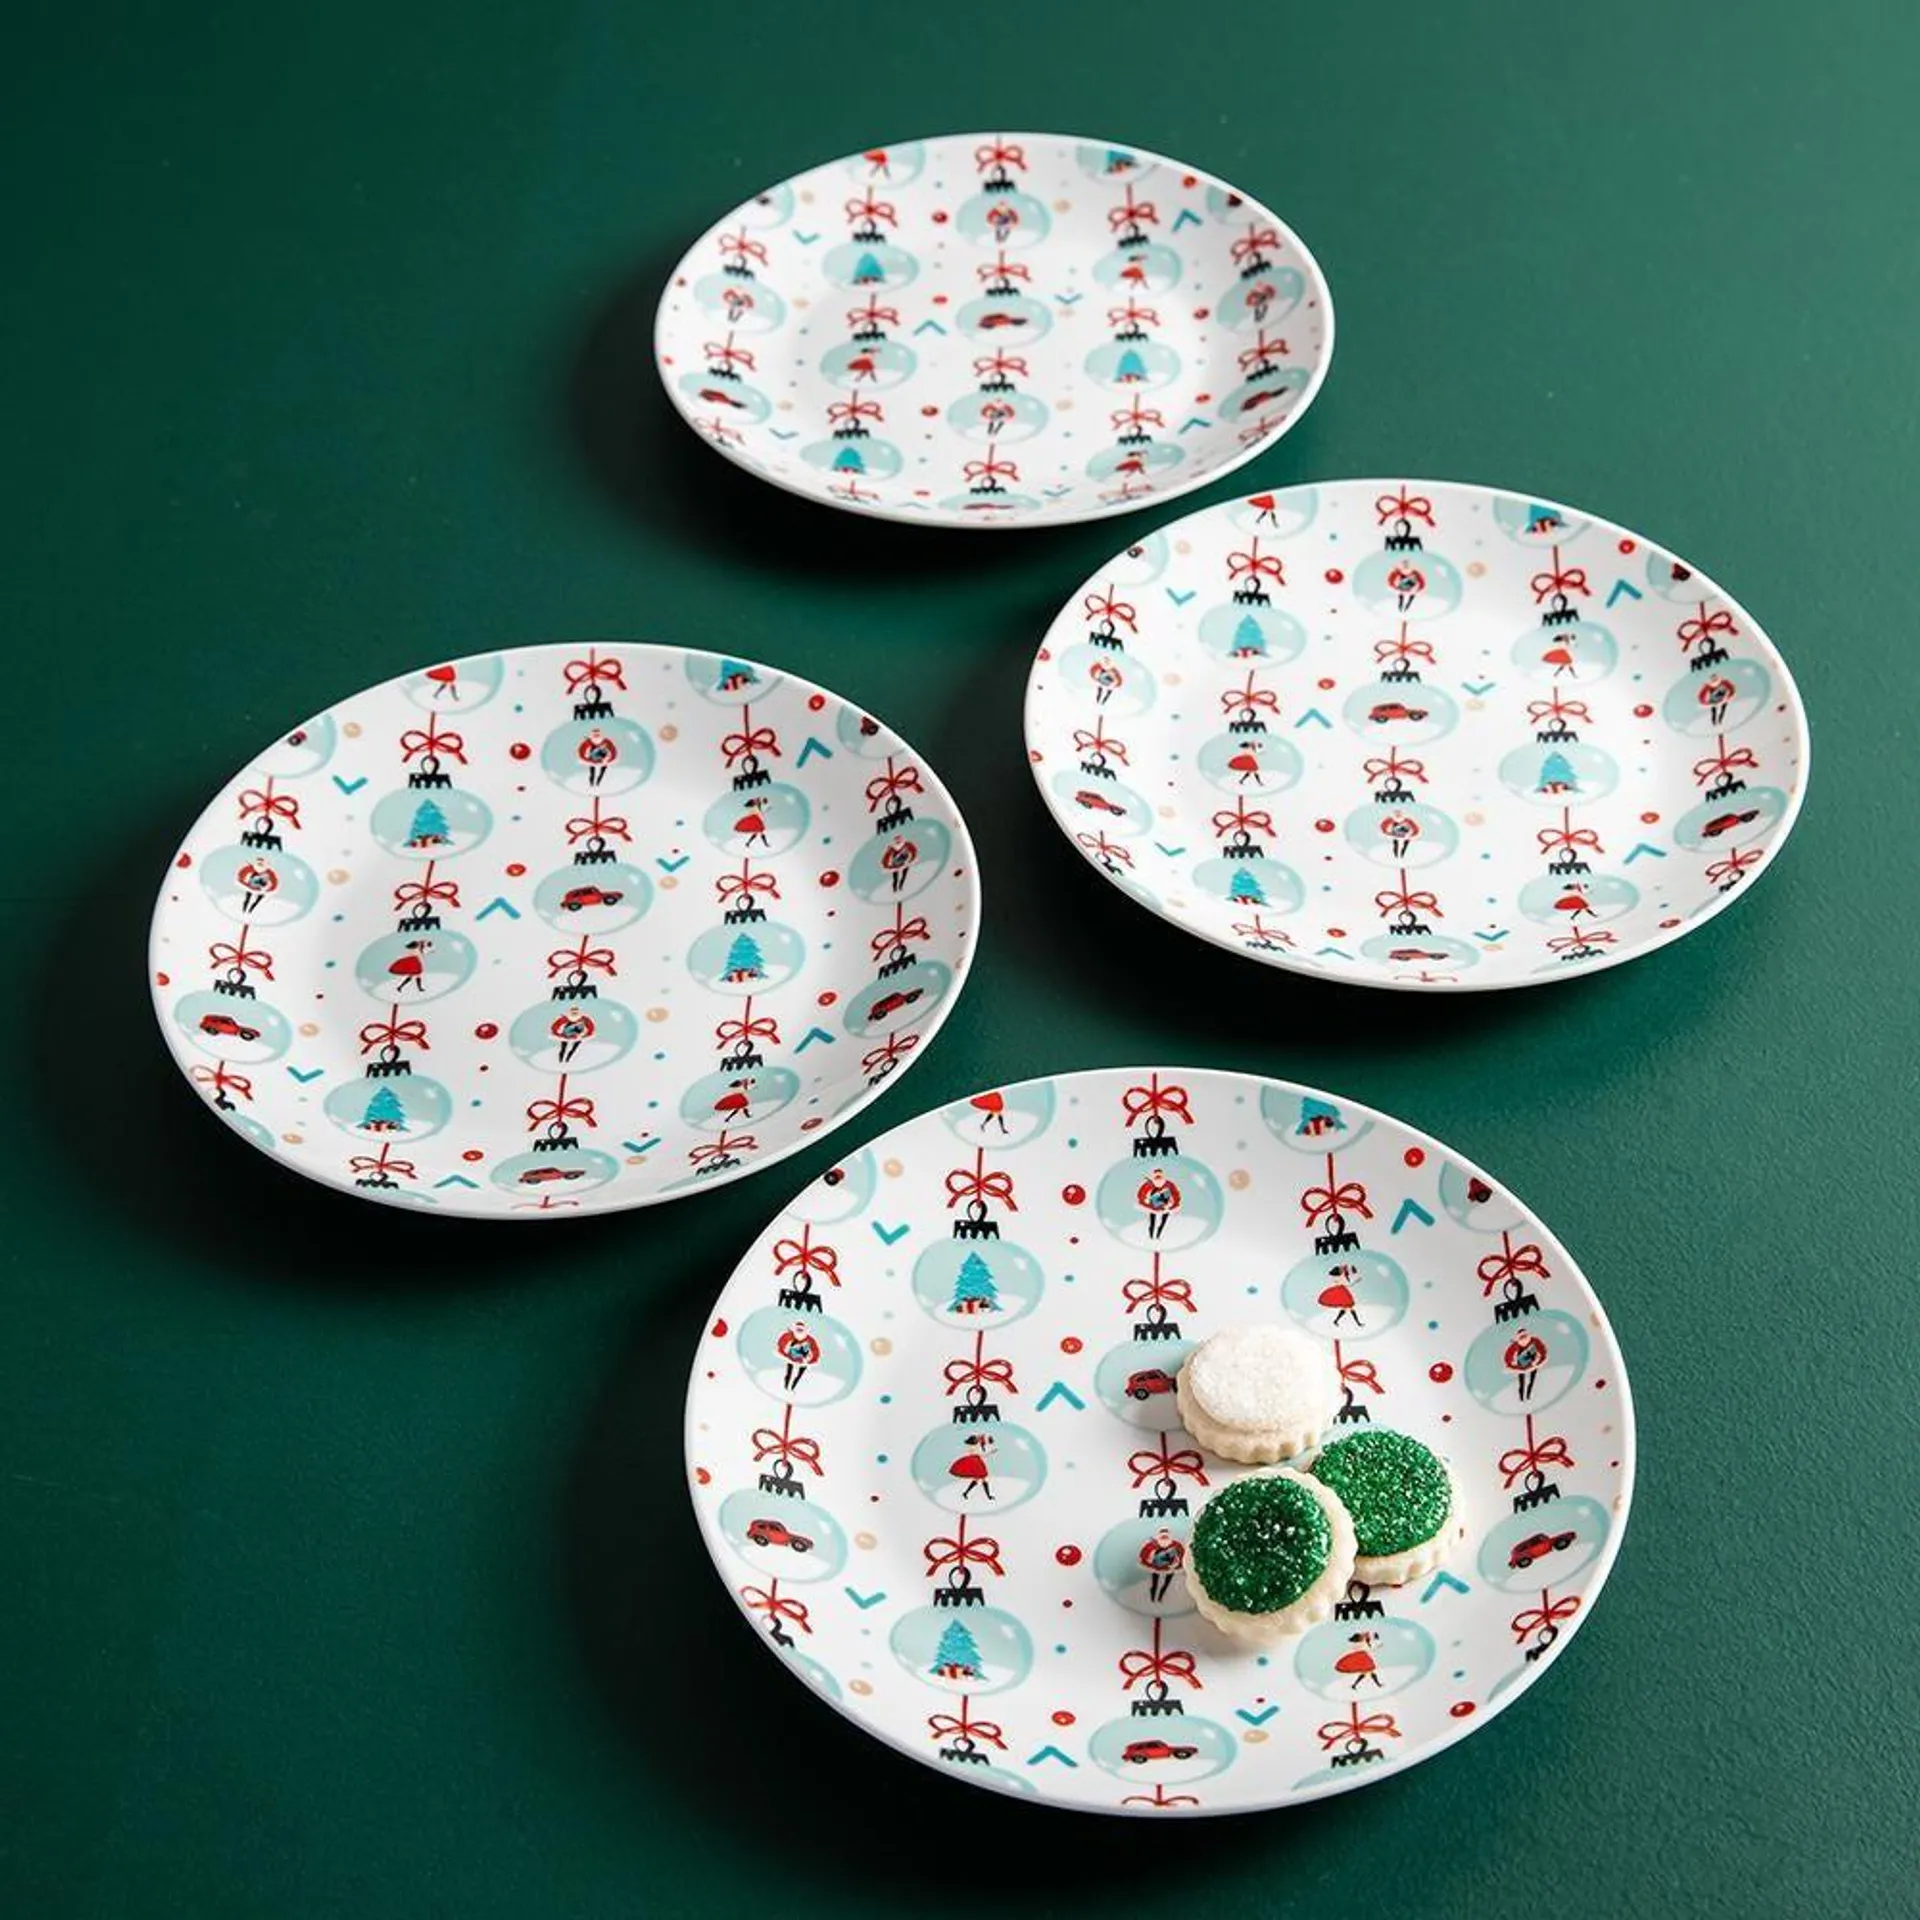 KSP Christmas Decal 'Oh What Fun' Porcelain Side Plate - Set of 4